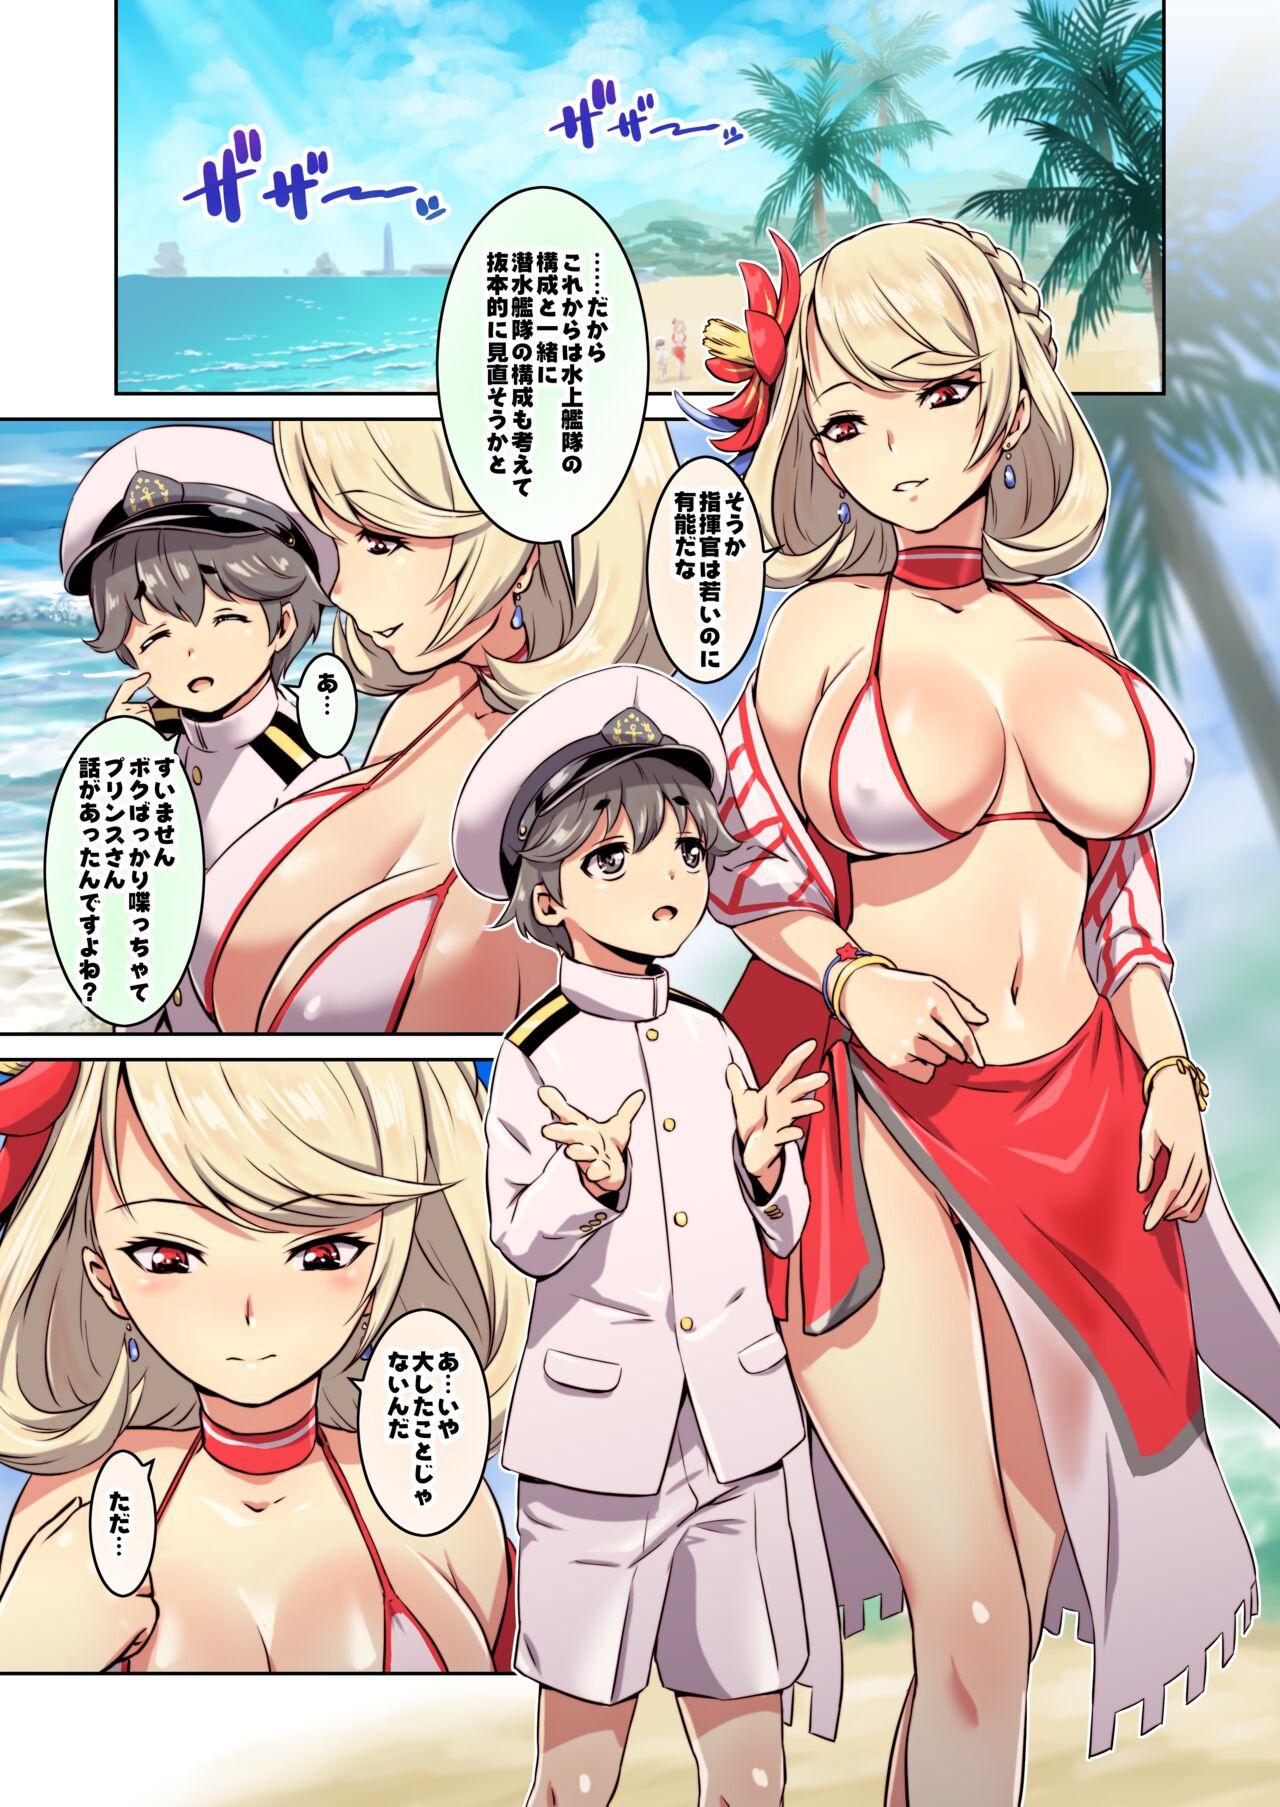 Cocksucking - POWにたべられたい！ - Azur lane Best Blow Jobs Ever - Page 3